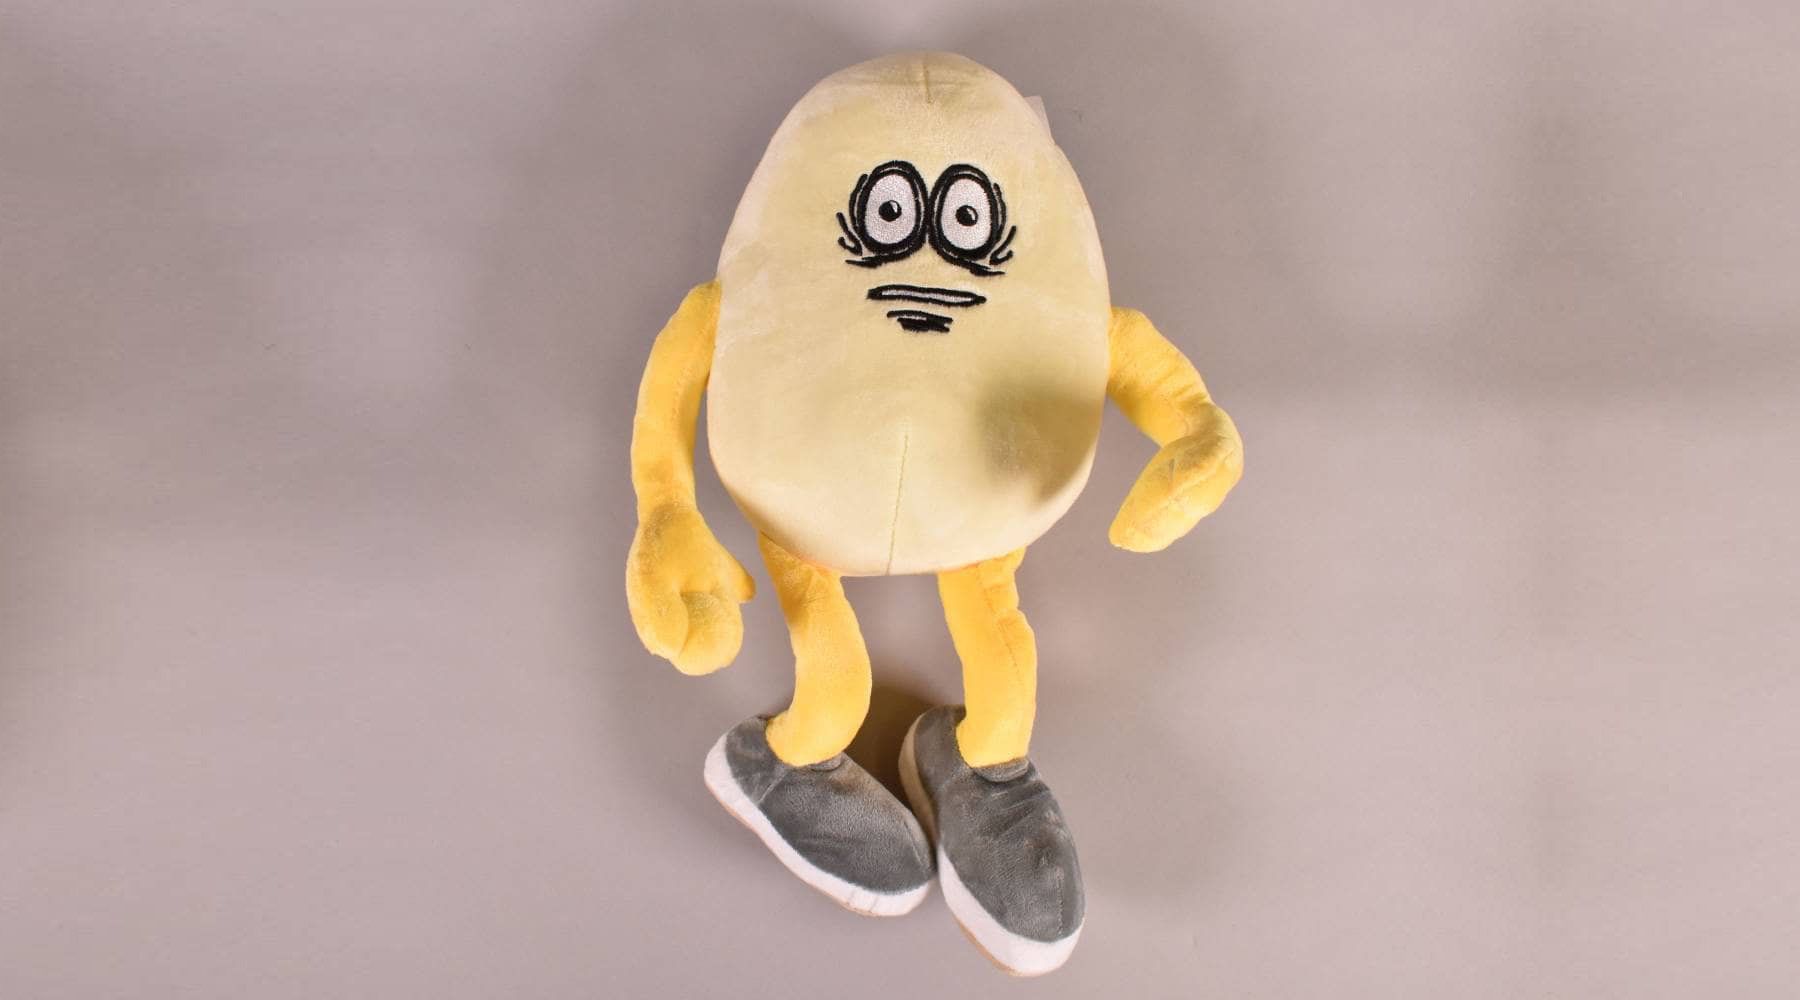 The Egg Plush Toy by Fos